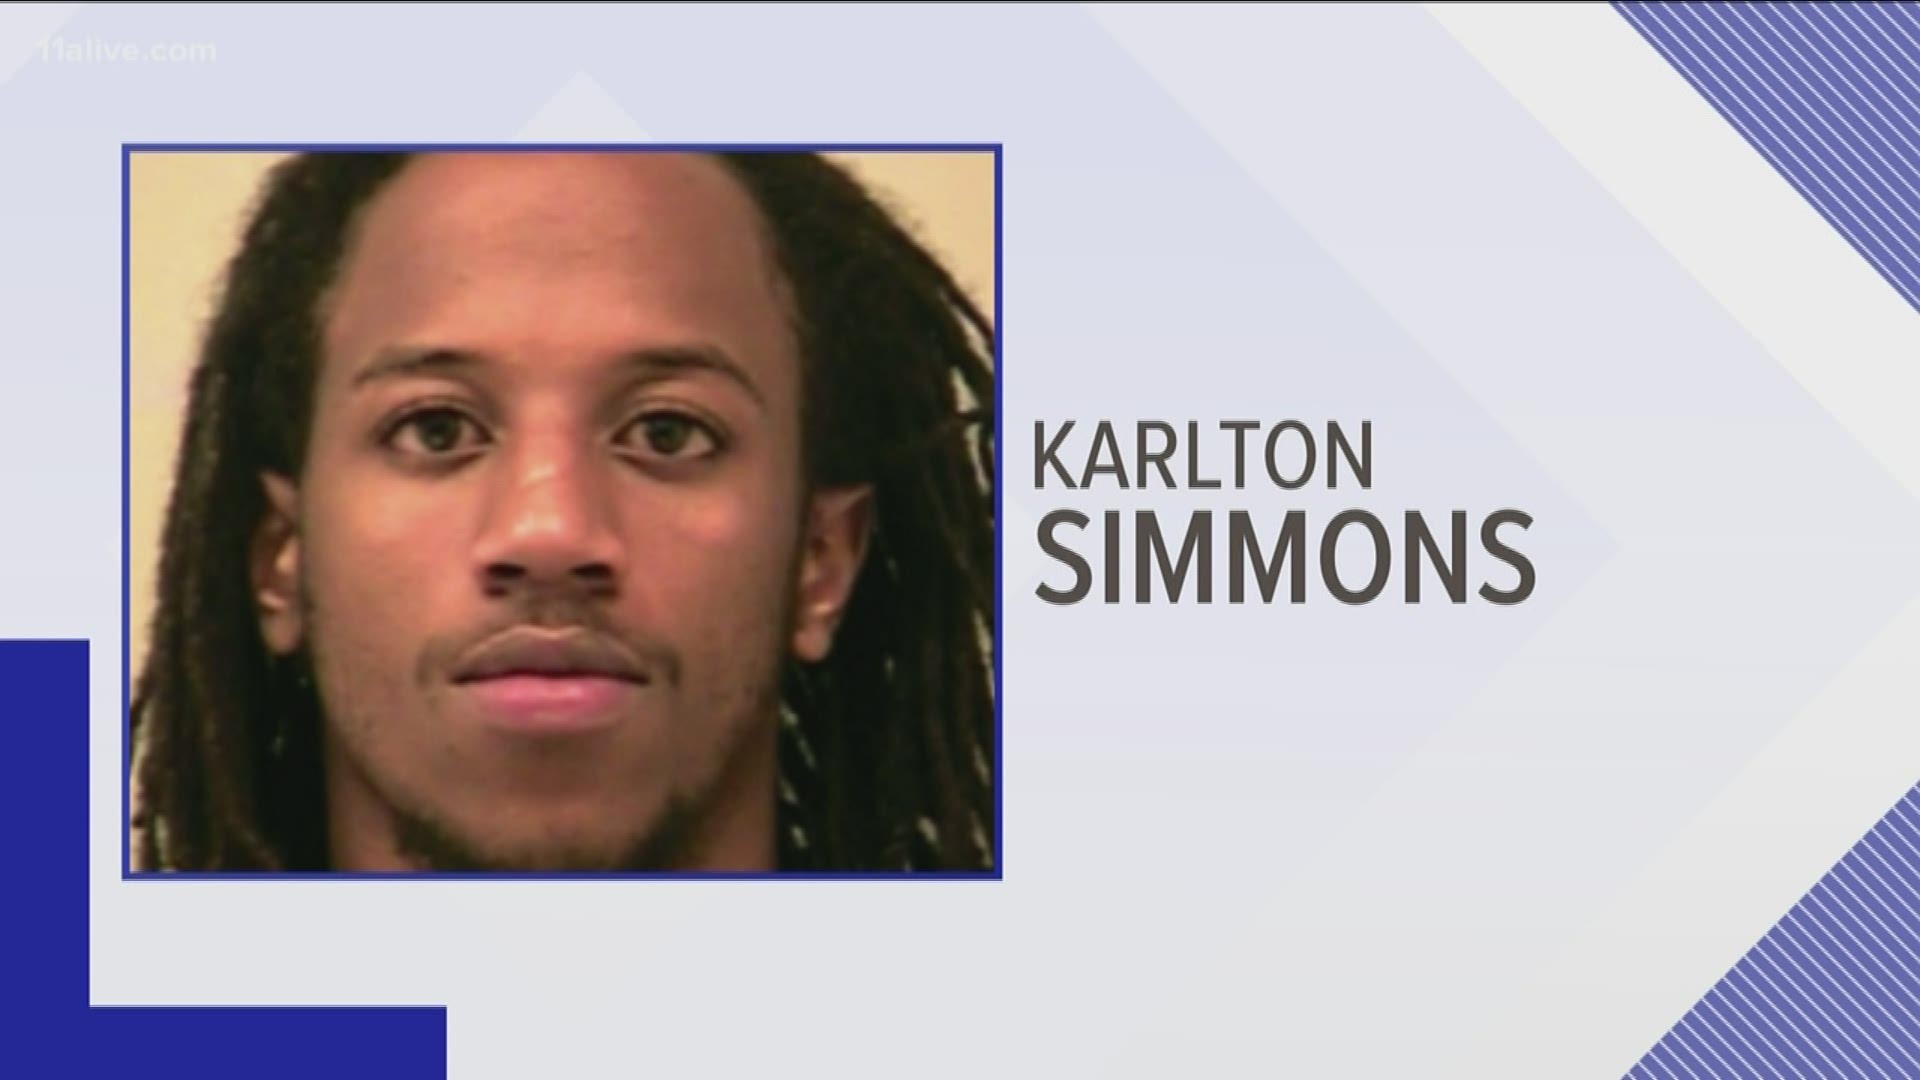 Police believe Karlton Simmons killed a man and his nephew in Gwinnett County.